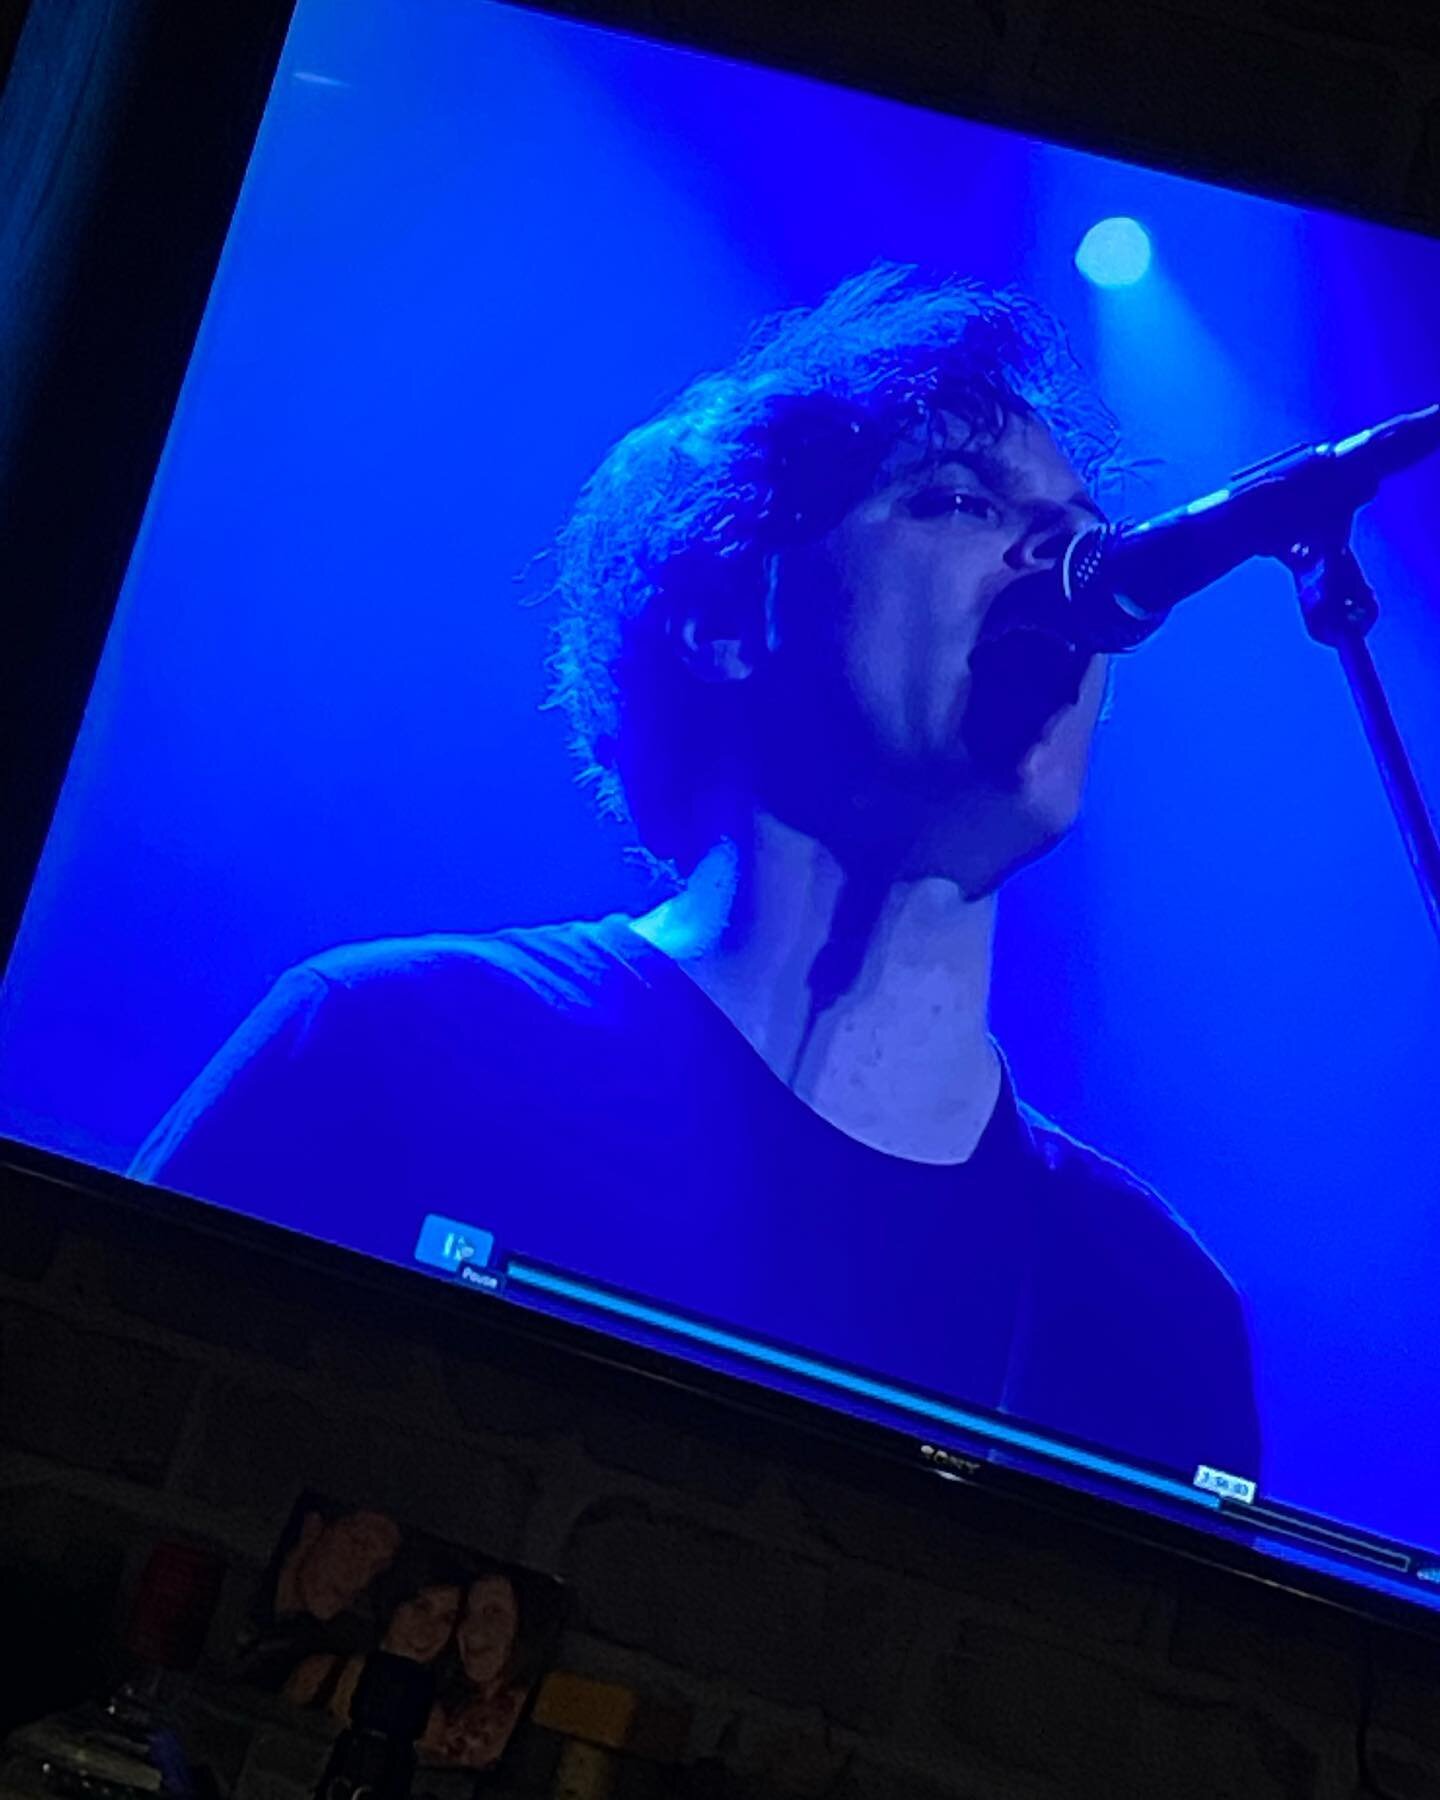 Watching @jbtvstudio music fest!! I remember being at this show. Killer @local_h show @metrochicago  Hats off to #jbtv for doing this. 

-dave 

#localh #livemusic #chicago #jbtvfest